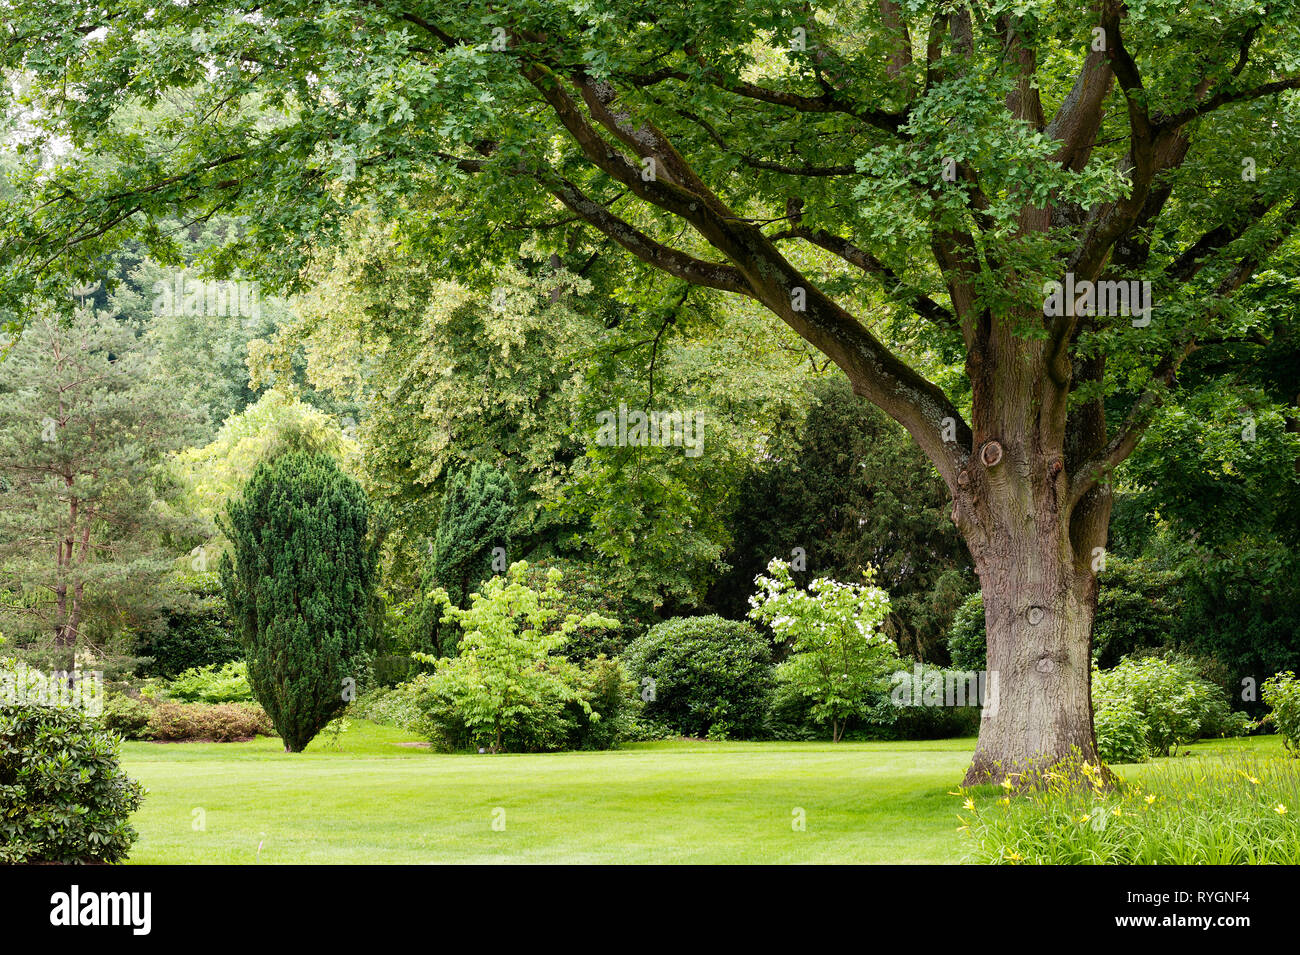 Trees by lawn Stock Photo